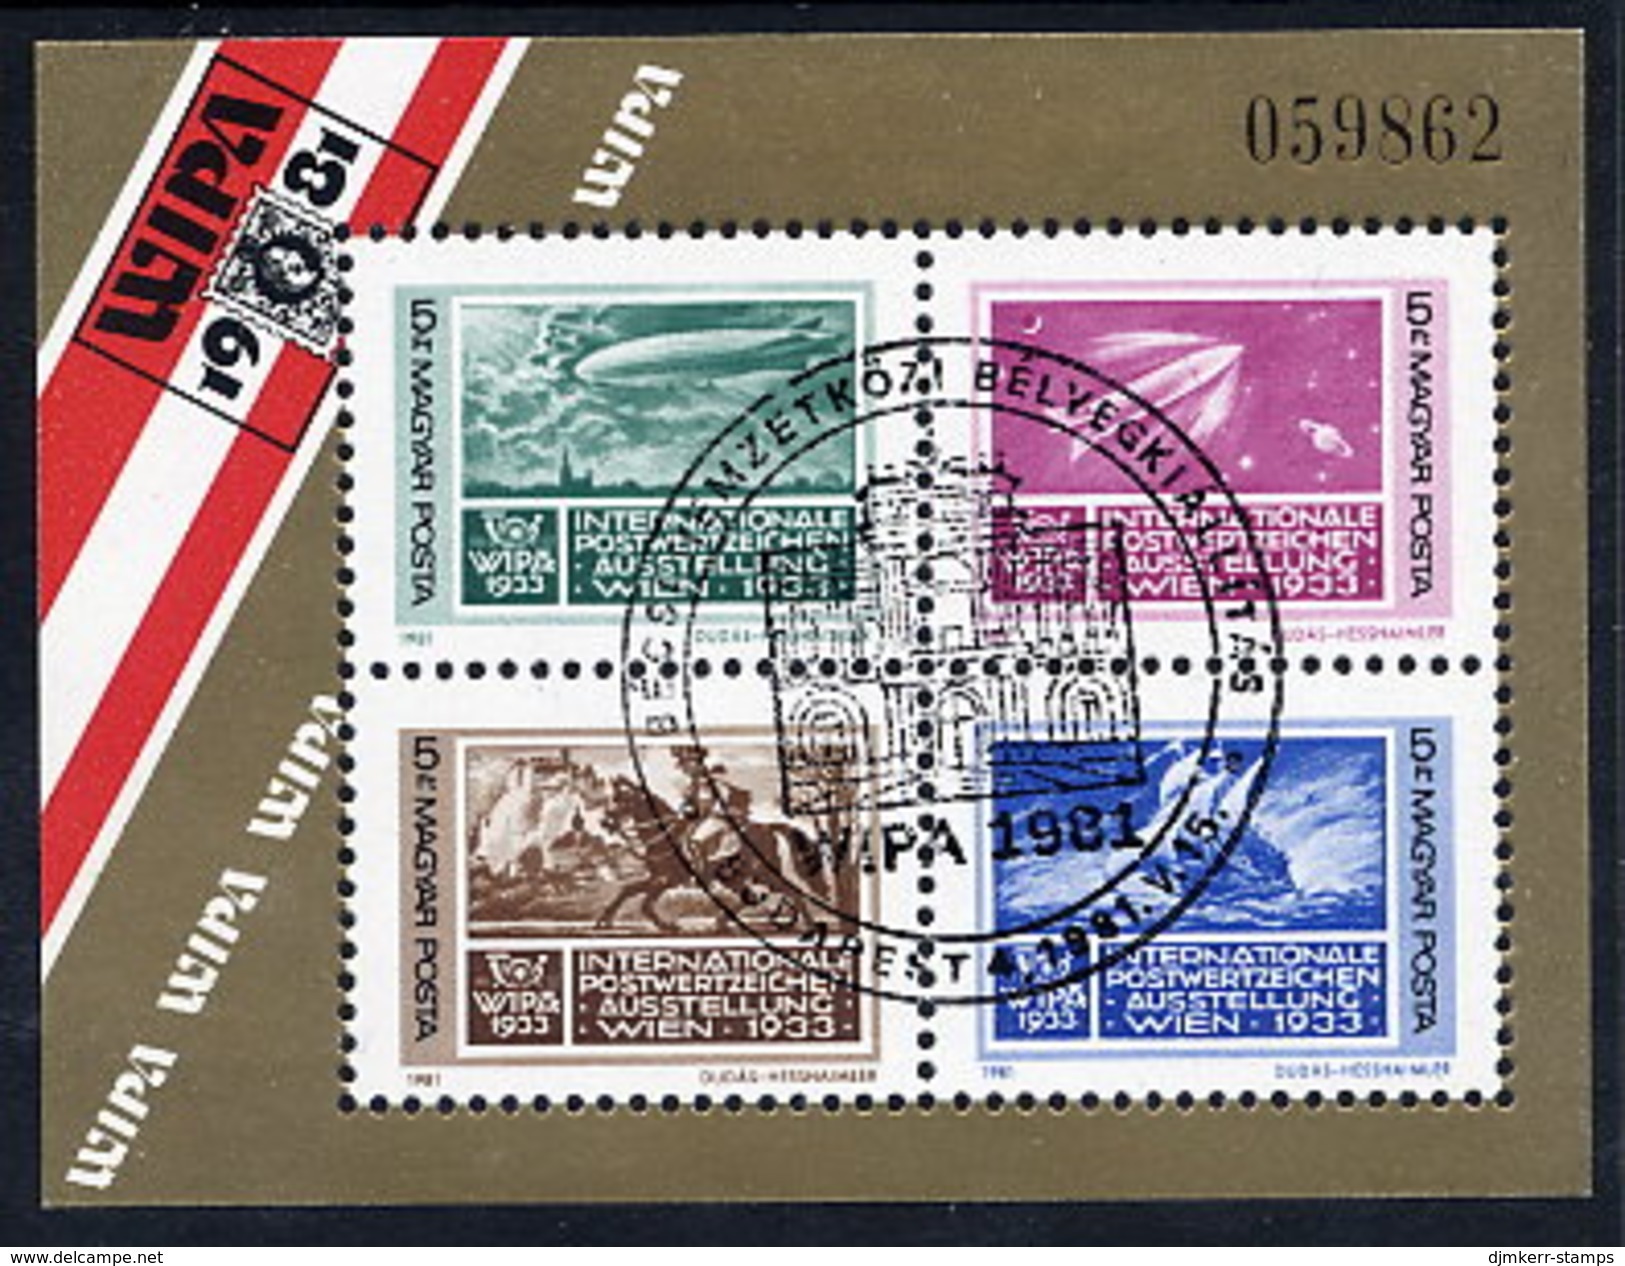 HUNGARY 1981 WIPA Stamp Exhibition Block Used.  Michel Block 150 - Oblitérés